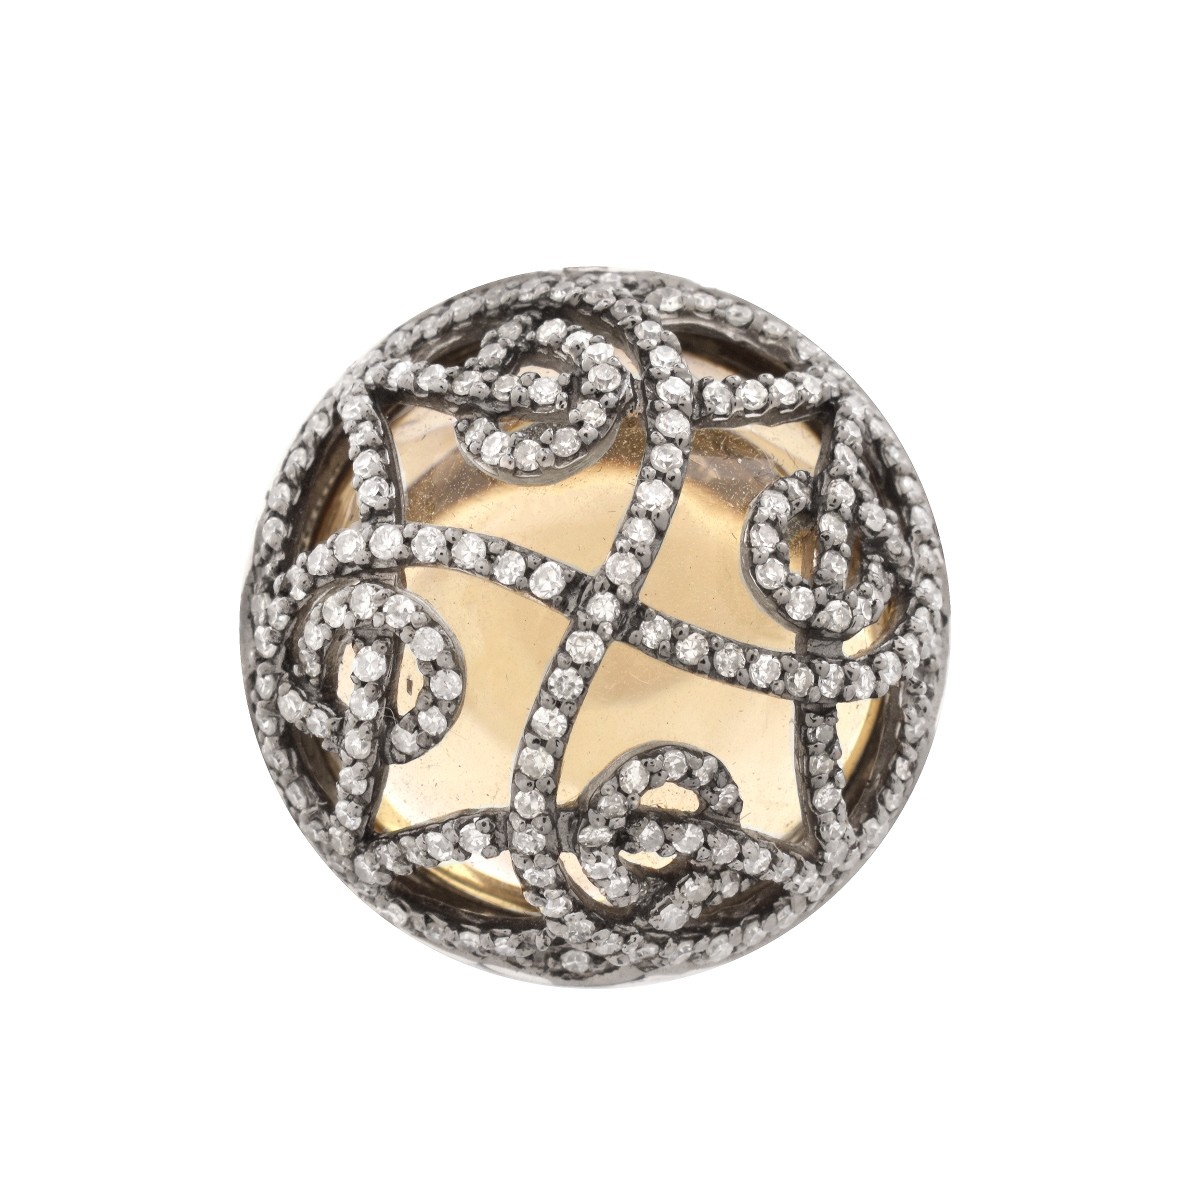 Nicole Miller Diamond and 14K Gold Ring